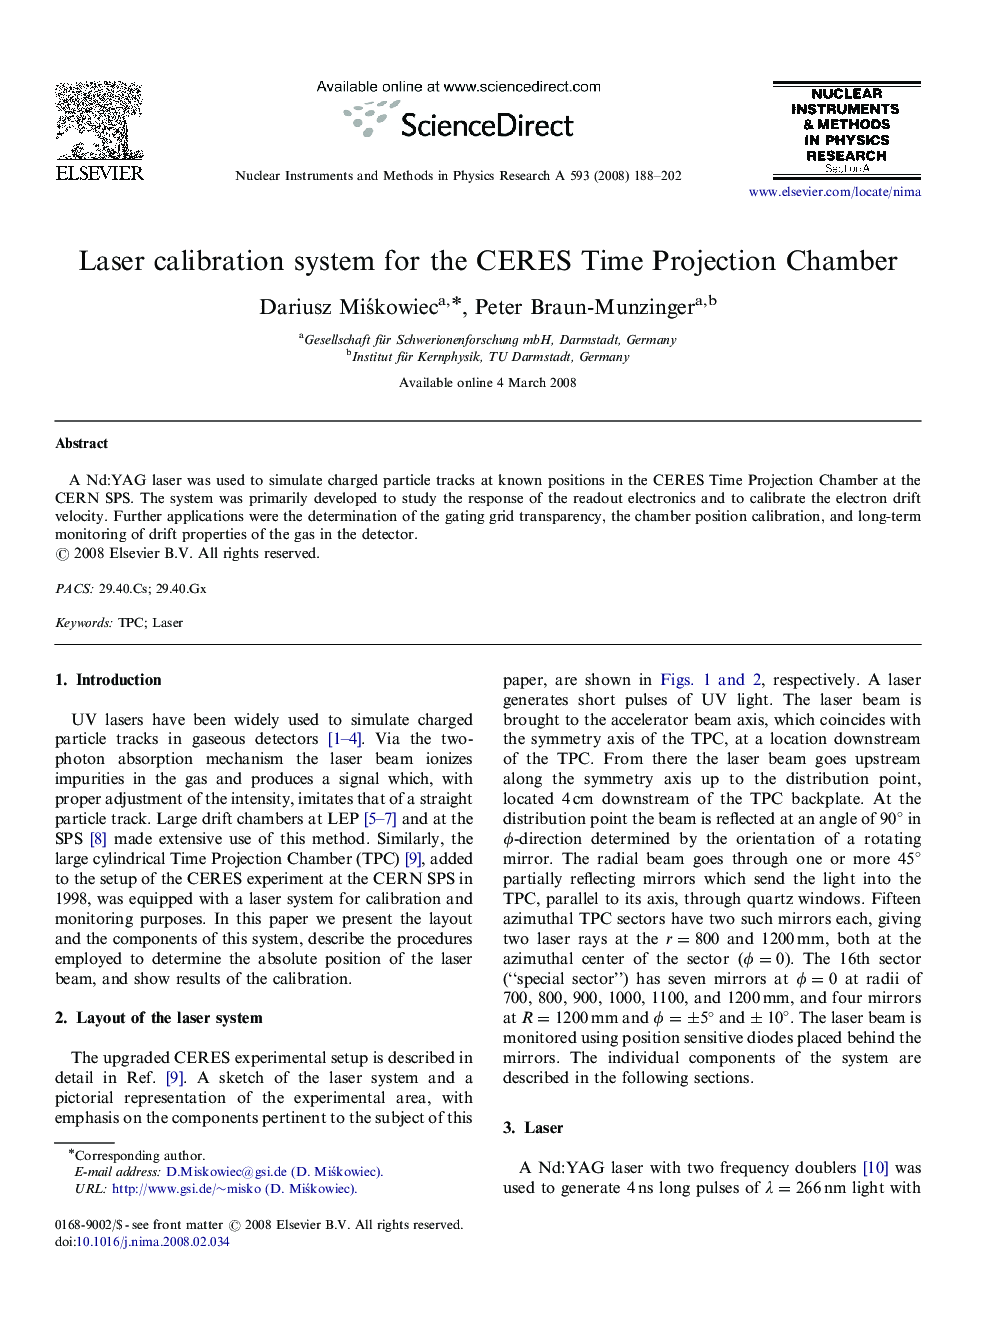 Laser calibration system for the CERES Time Projection Chamber